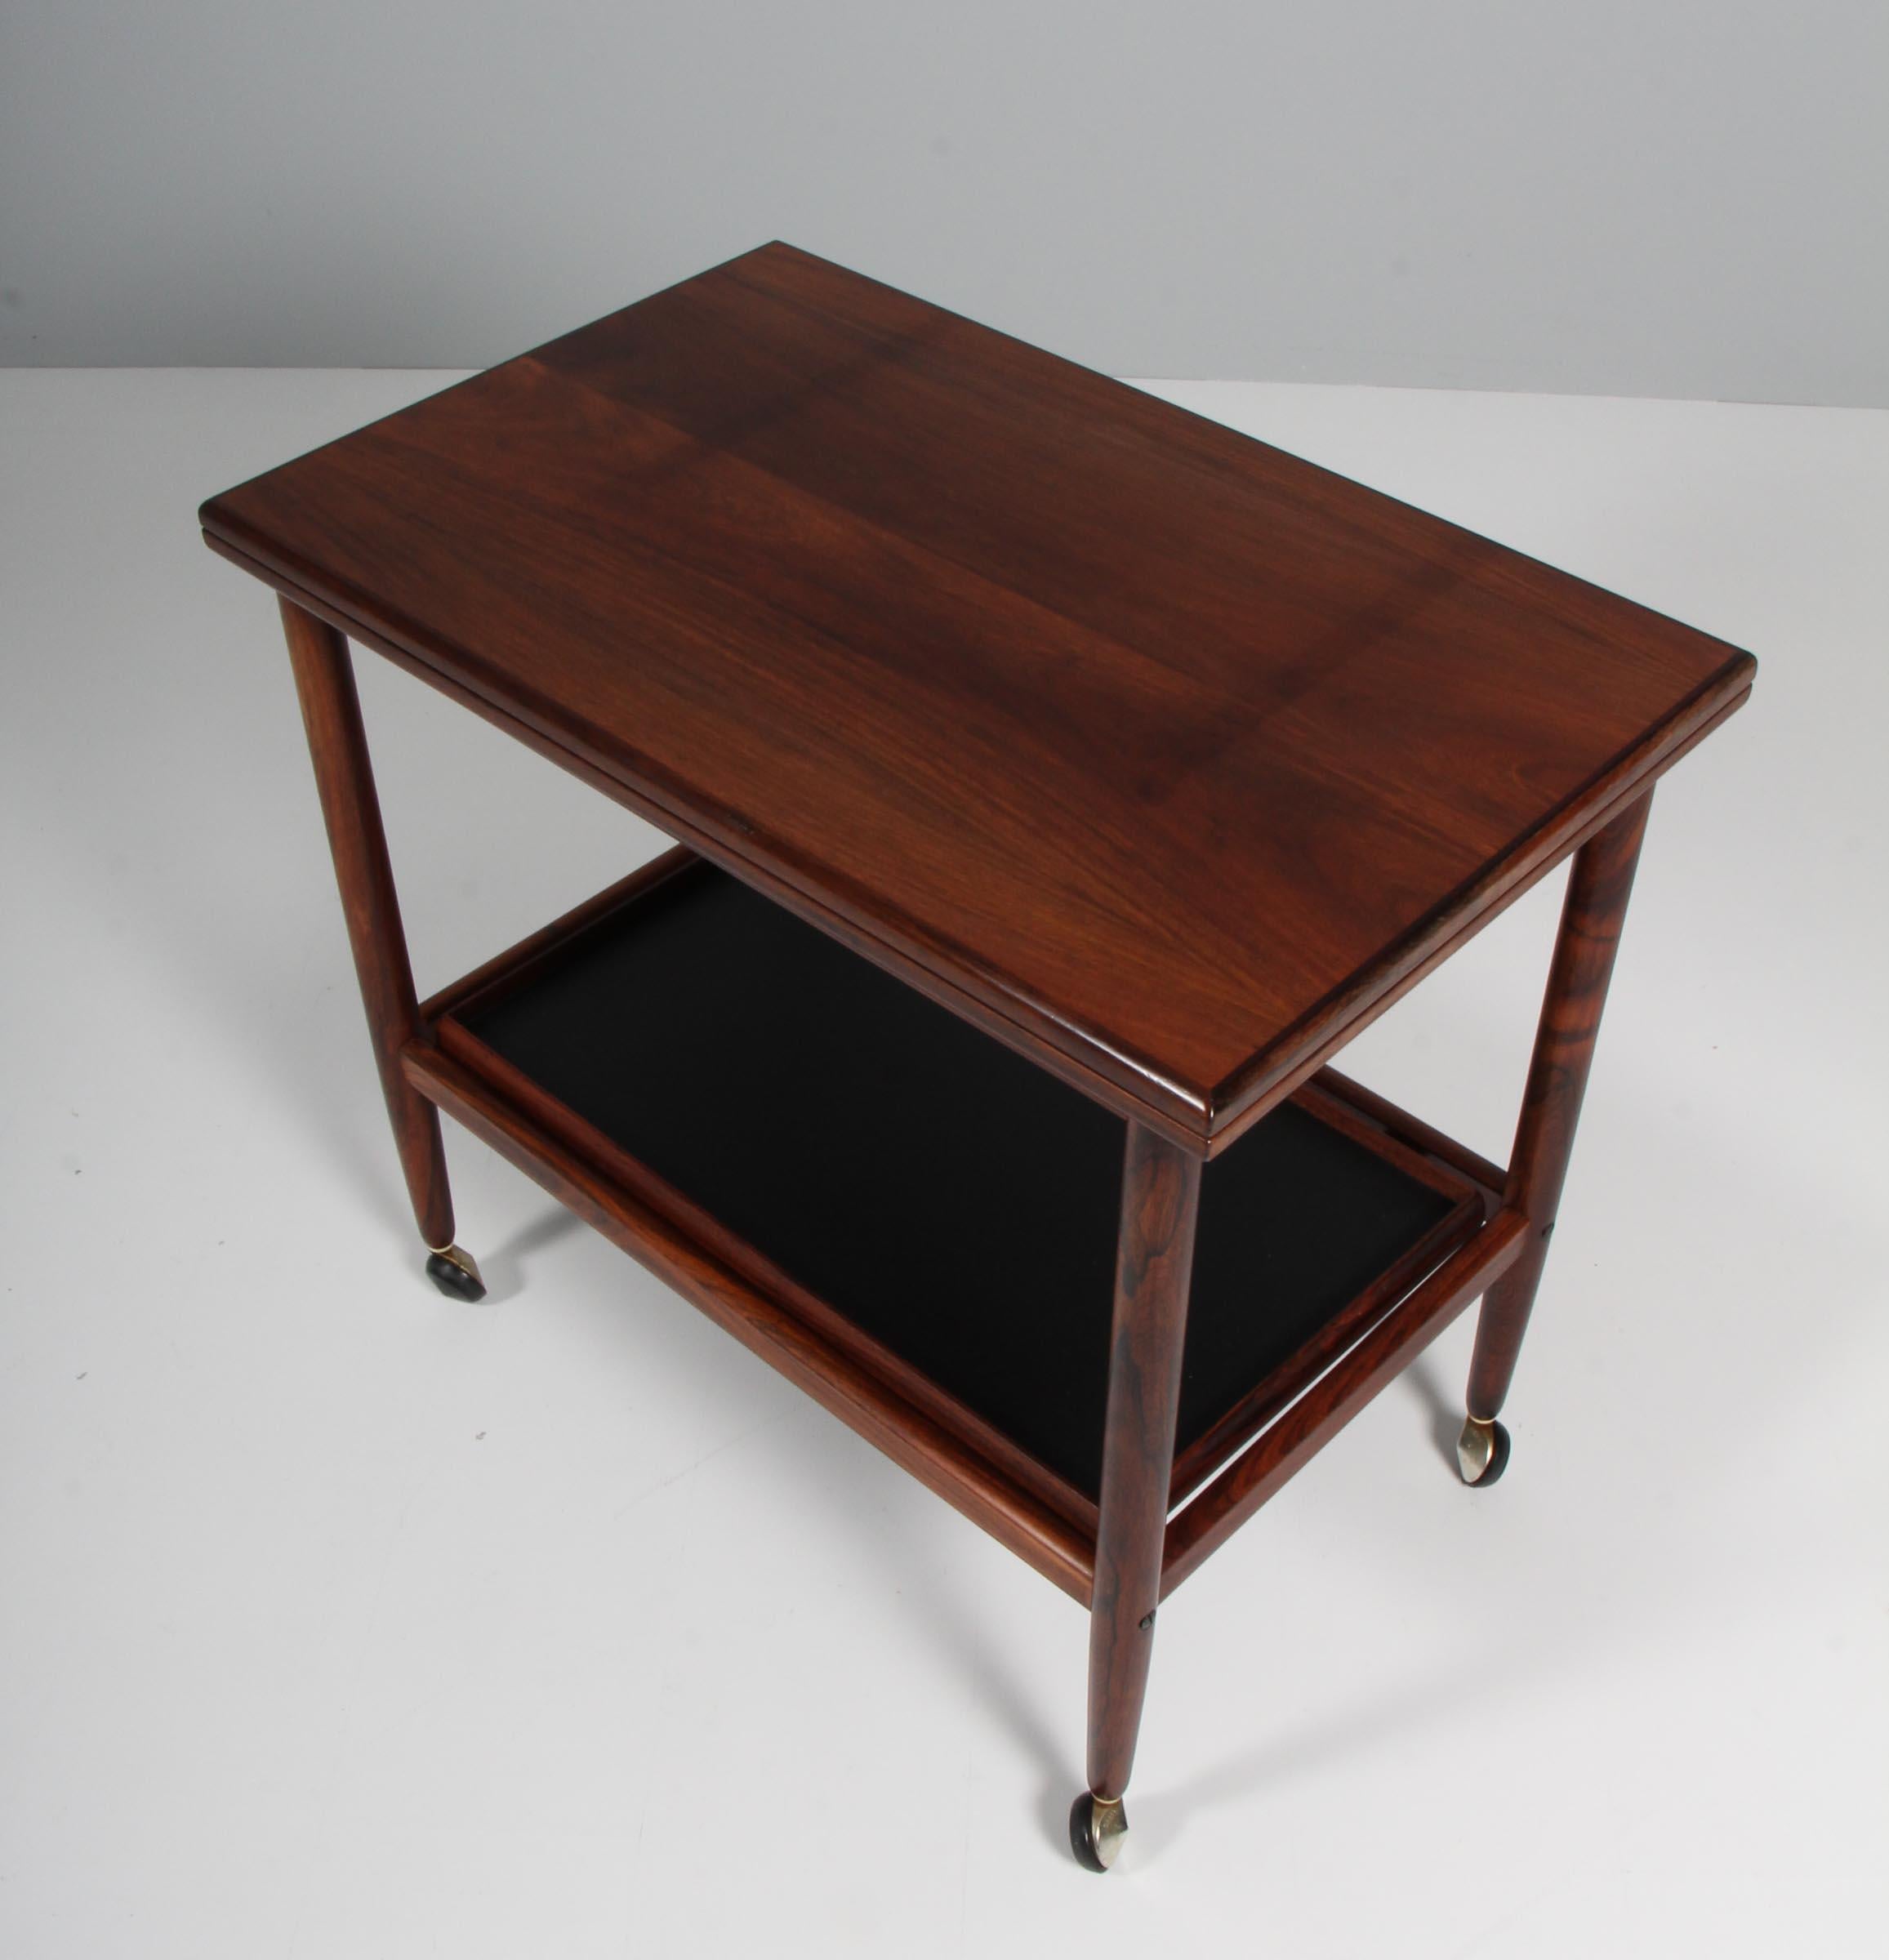 Ole Wanscher bar cart / tray cart with frame of rosewood. Foldable top with a width of 44/88 cm. 

Buttom tray of black leather.

Model Rungstedlund, made by Poul Jeppesen.

